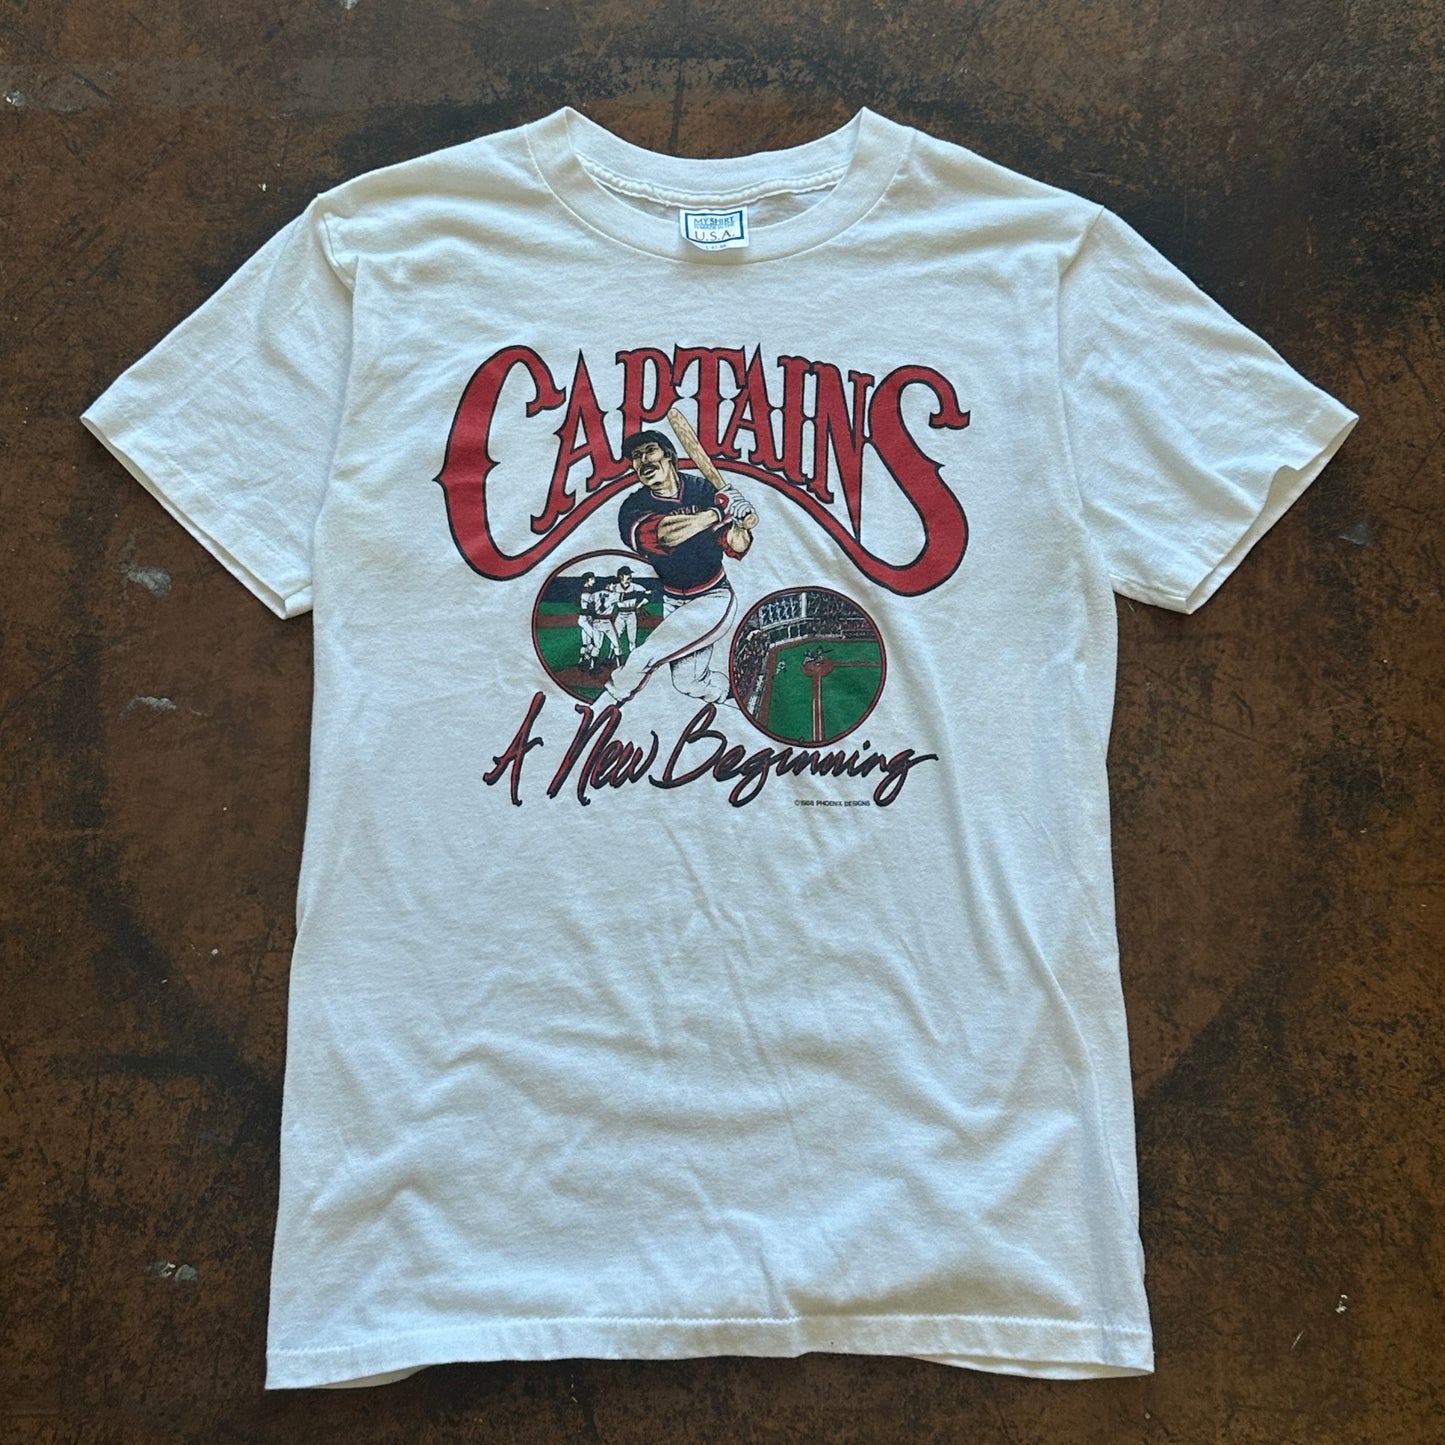 86' Captains Tee